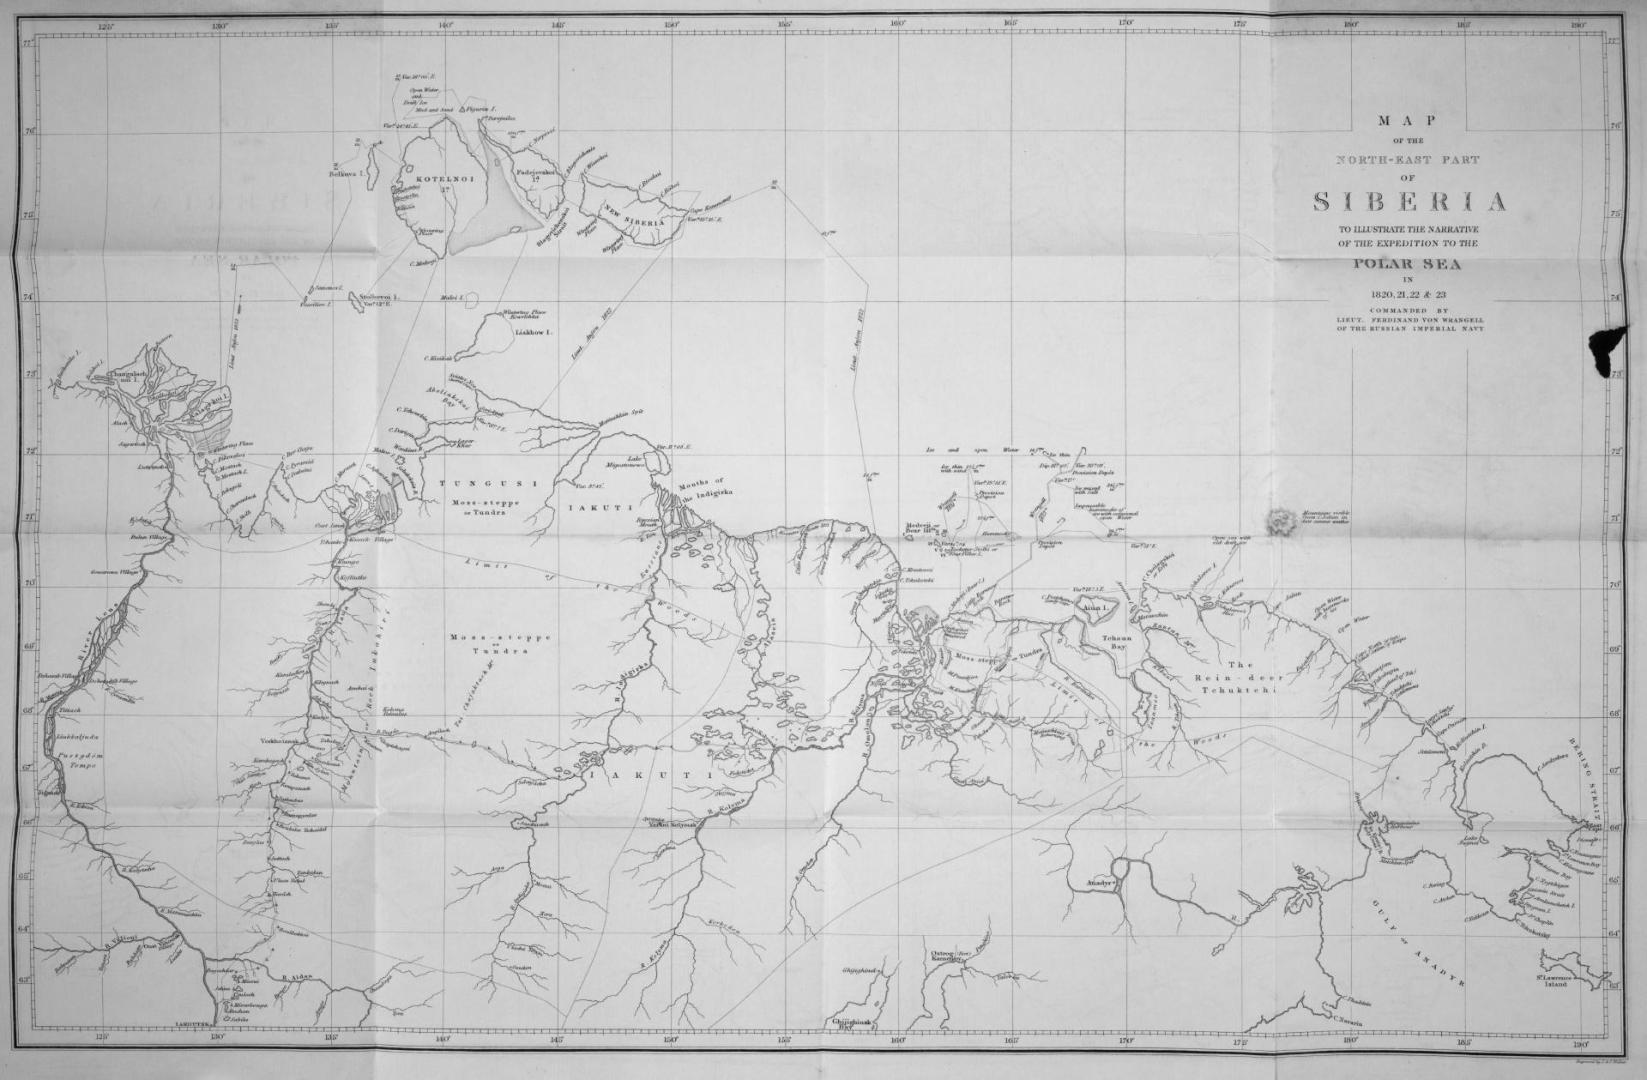 Narrative of an expedition to the Polar Sea, in the years 1820, 1821, 1822, & 1823